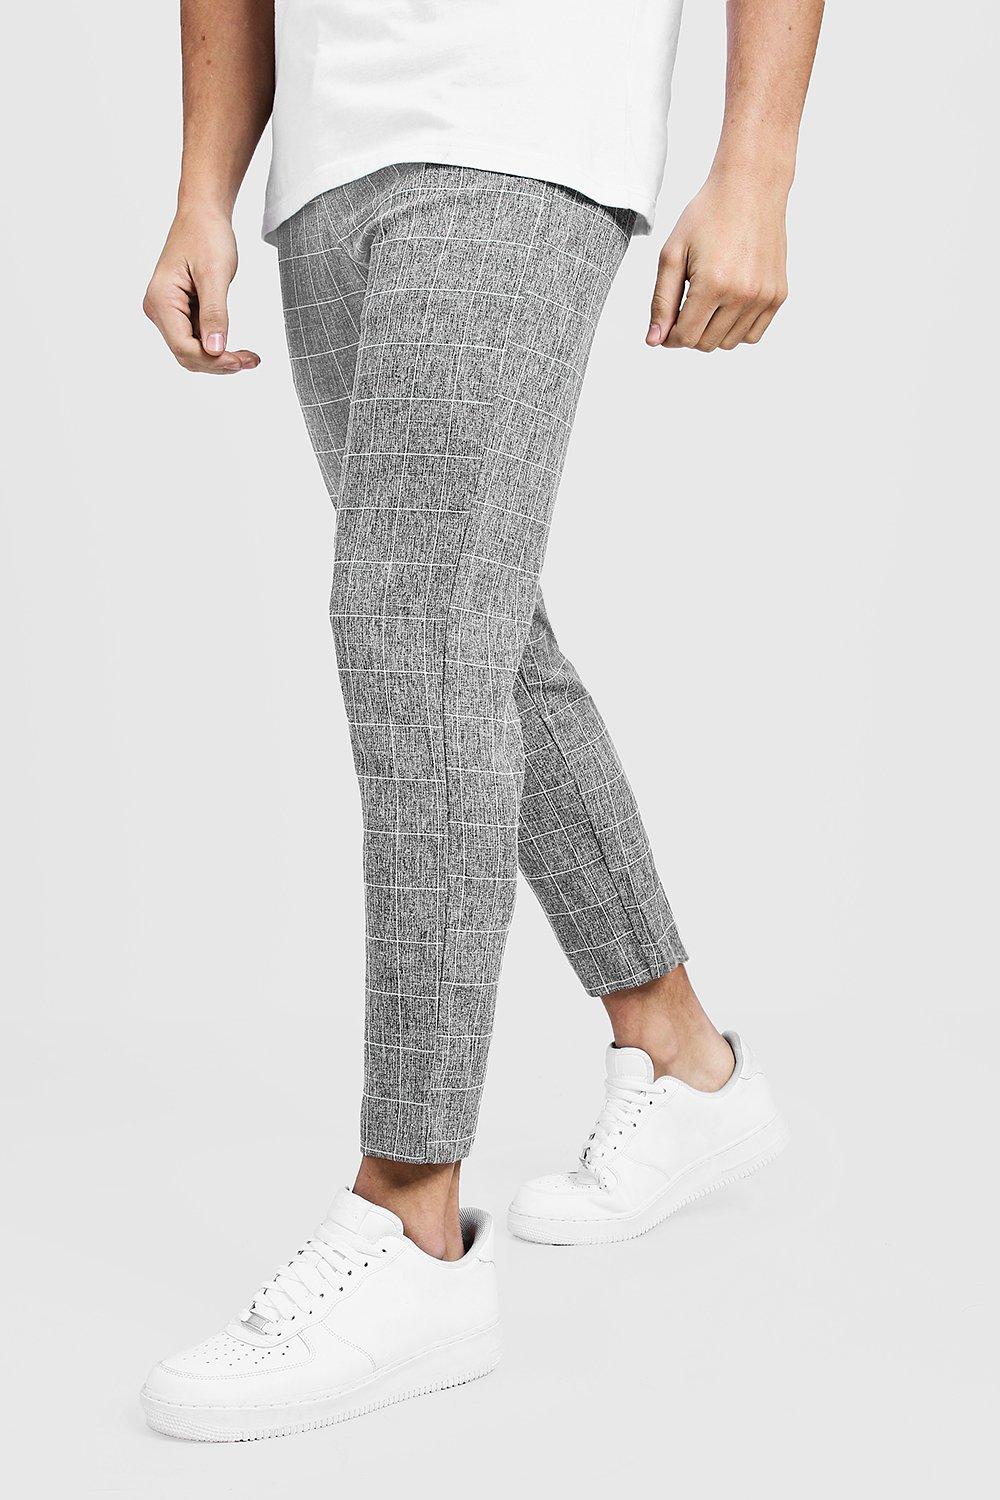 grey tapered pants